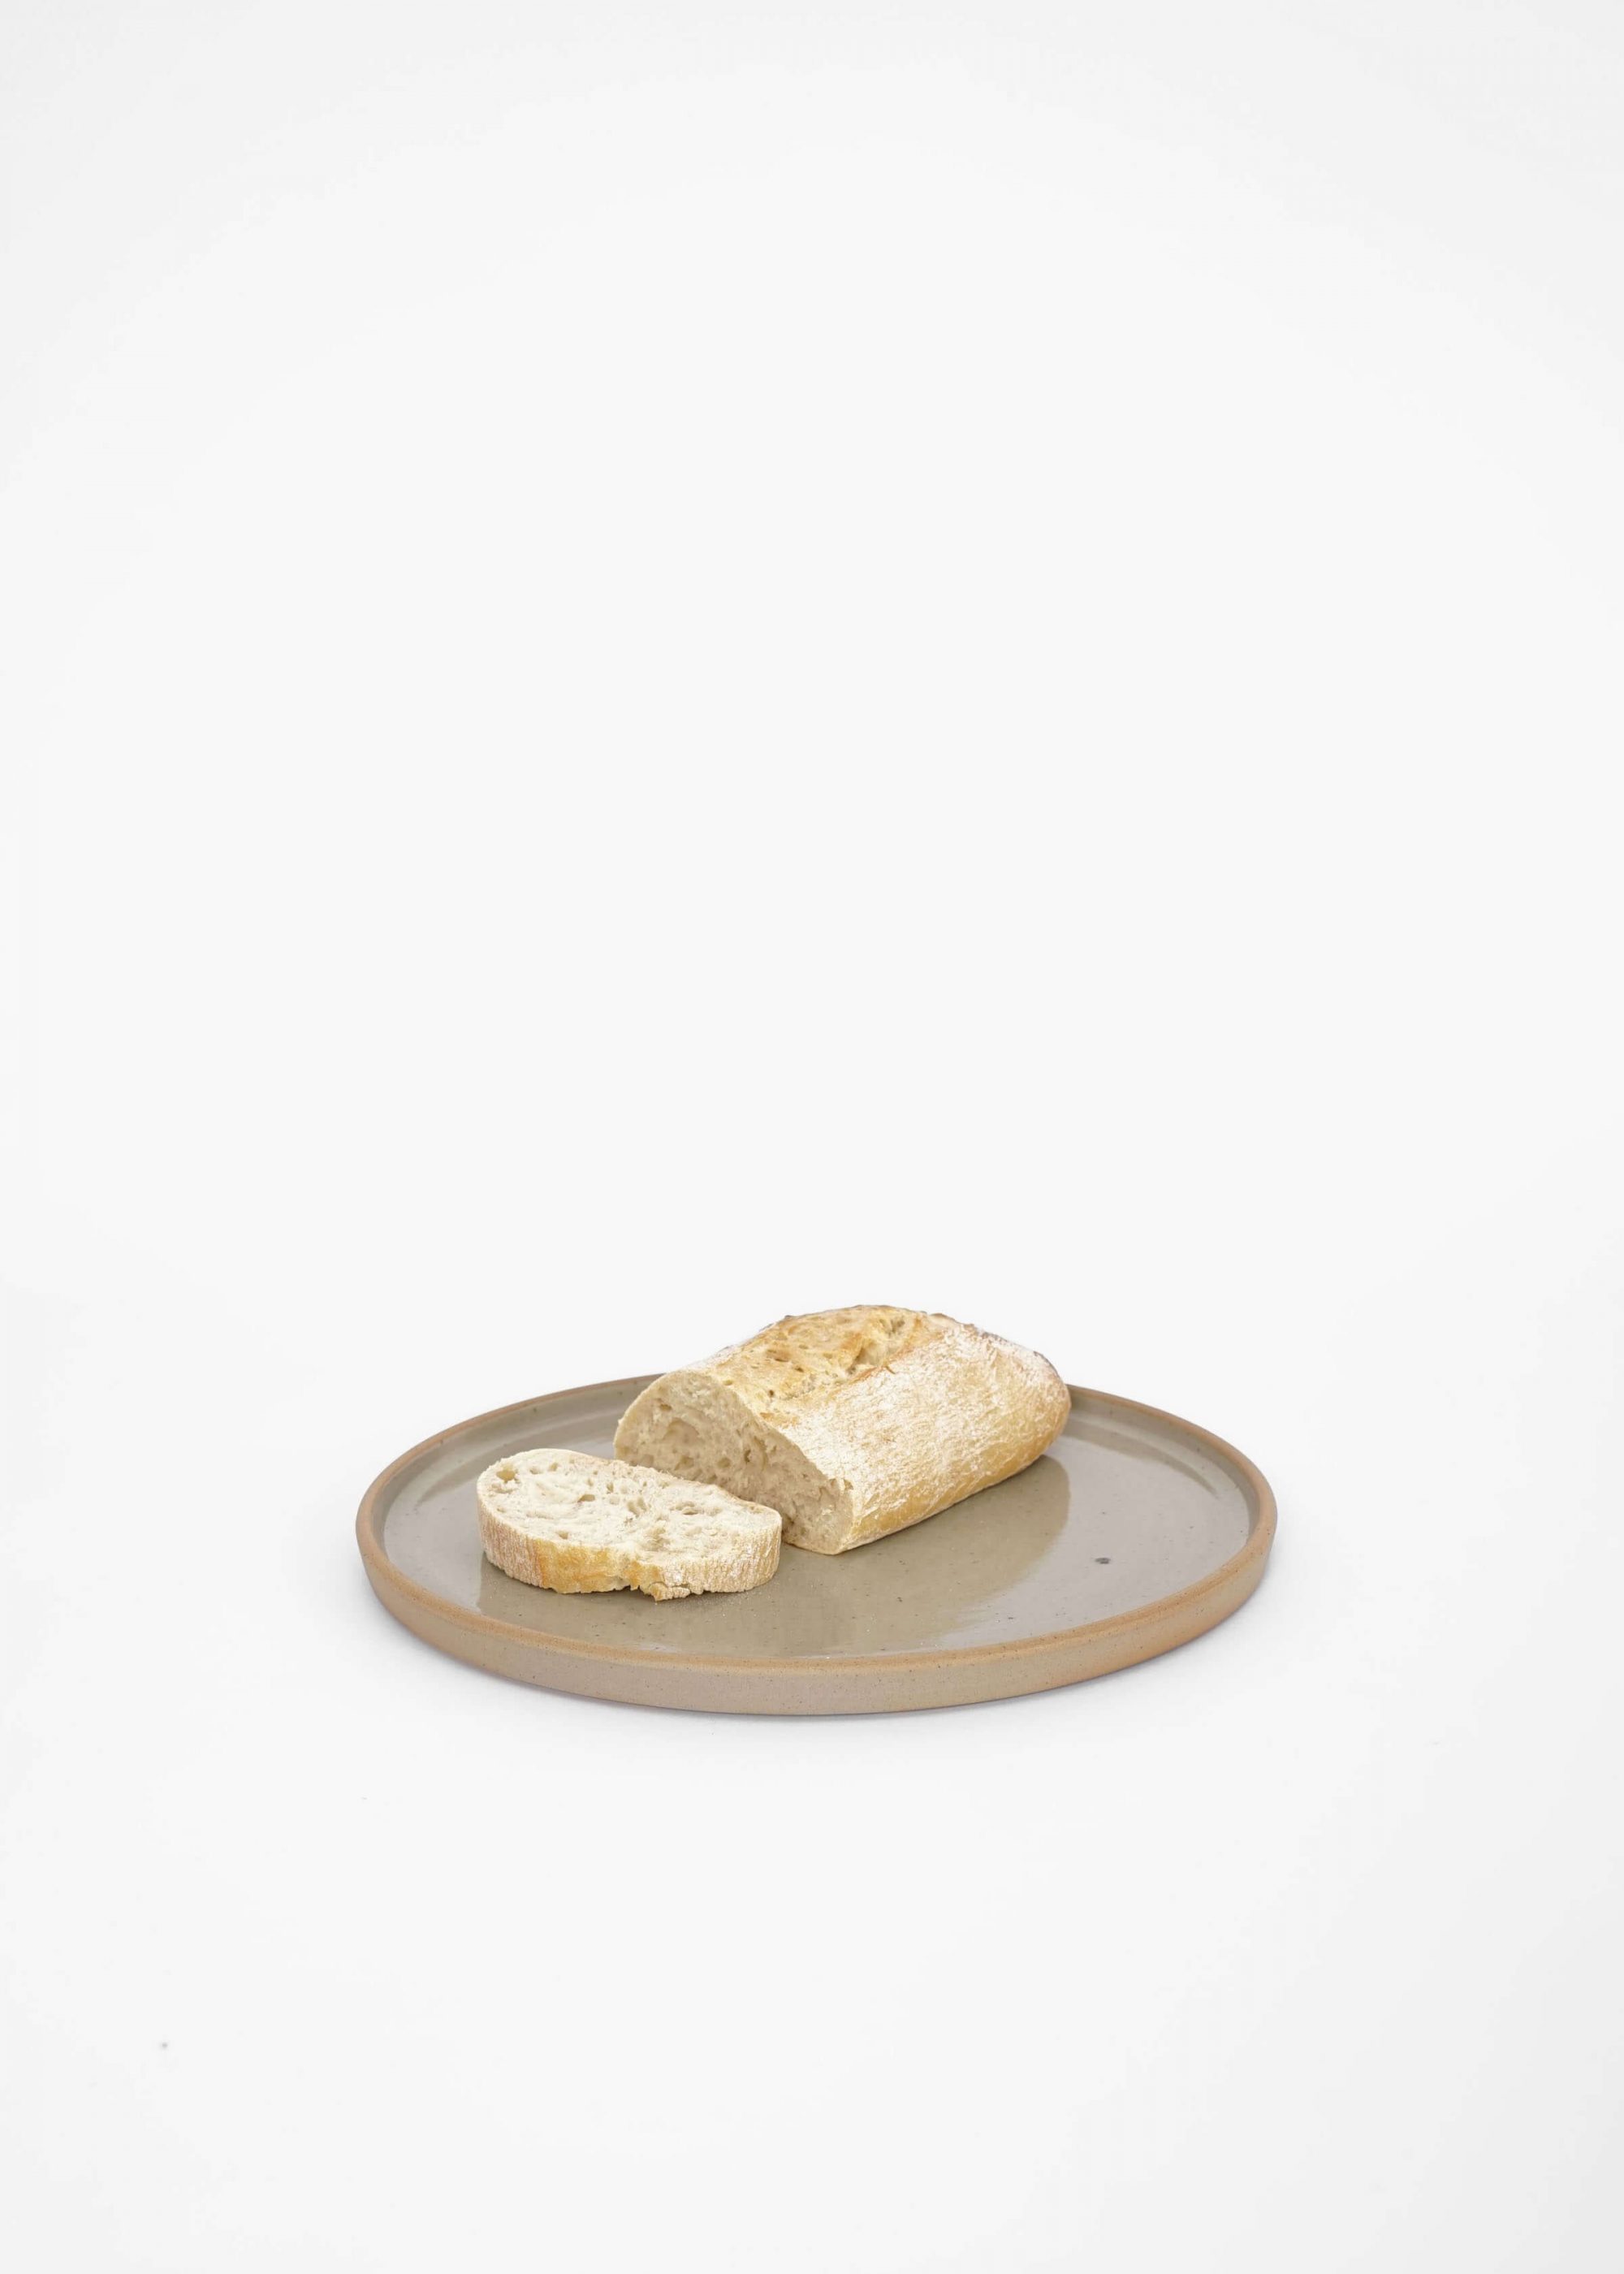 Product image for N° ICSC6 BEUYS Serving Plate Ø 30 cm